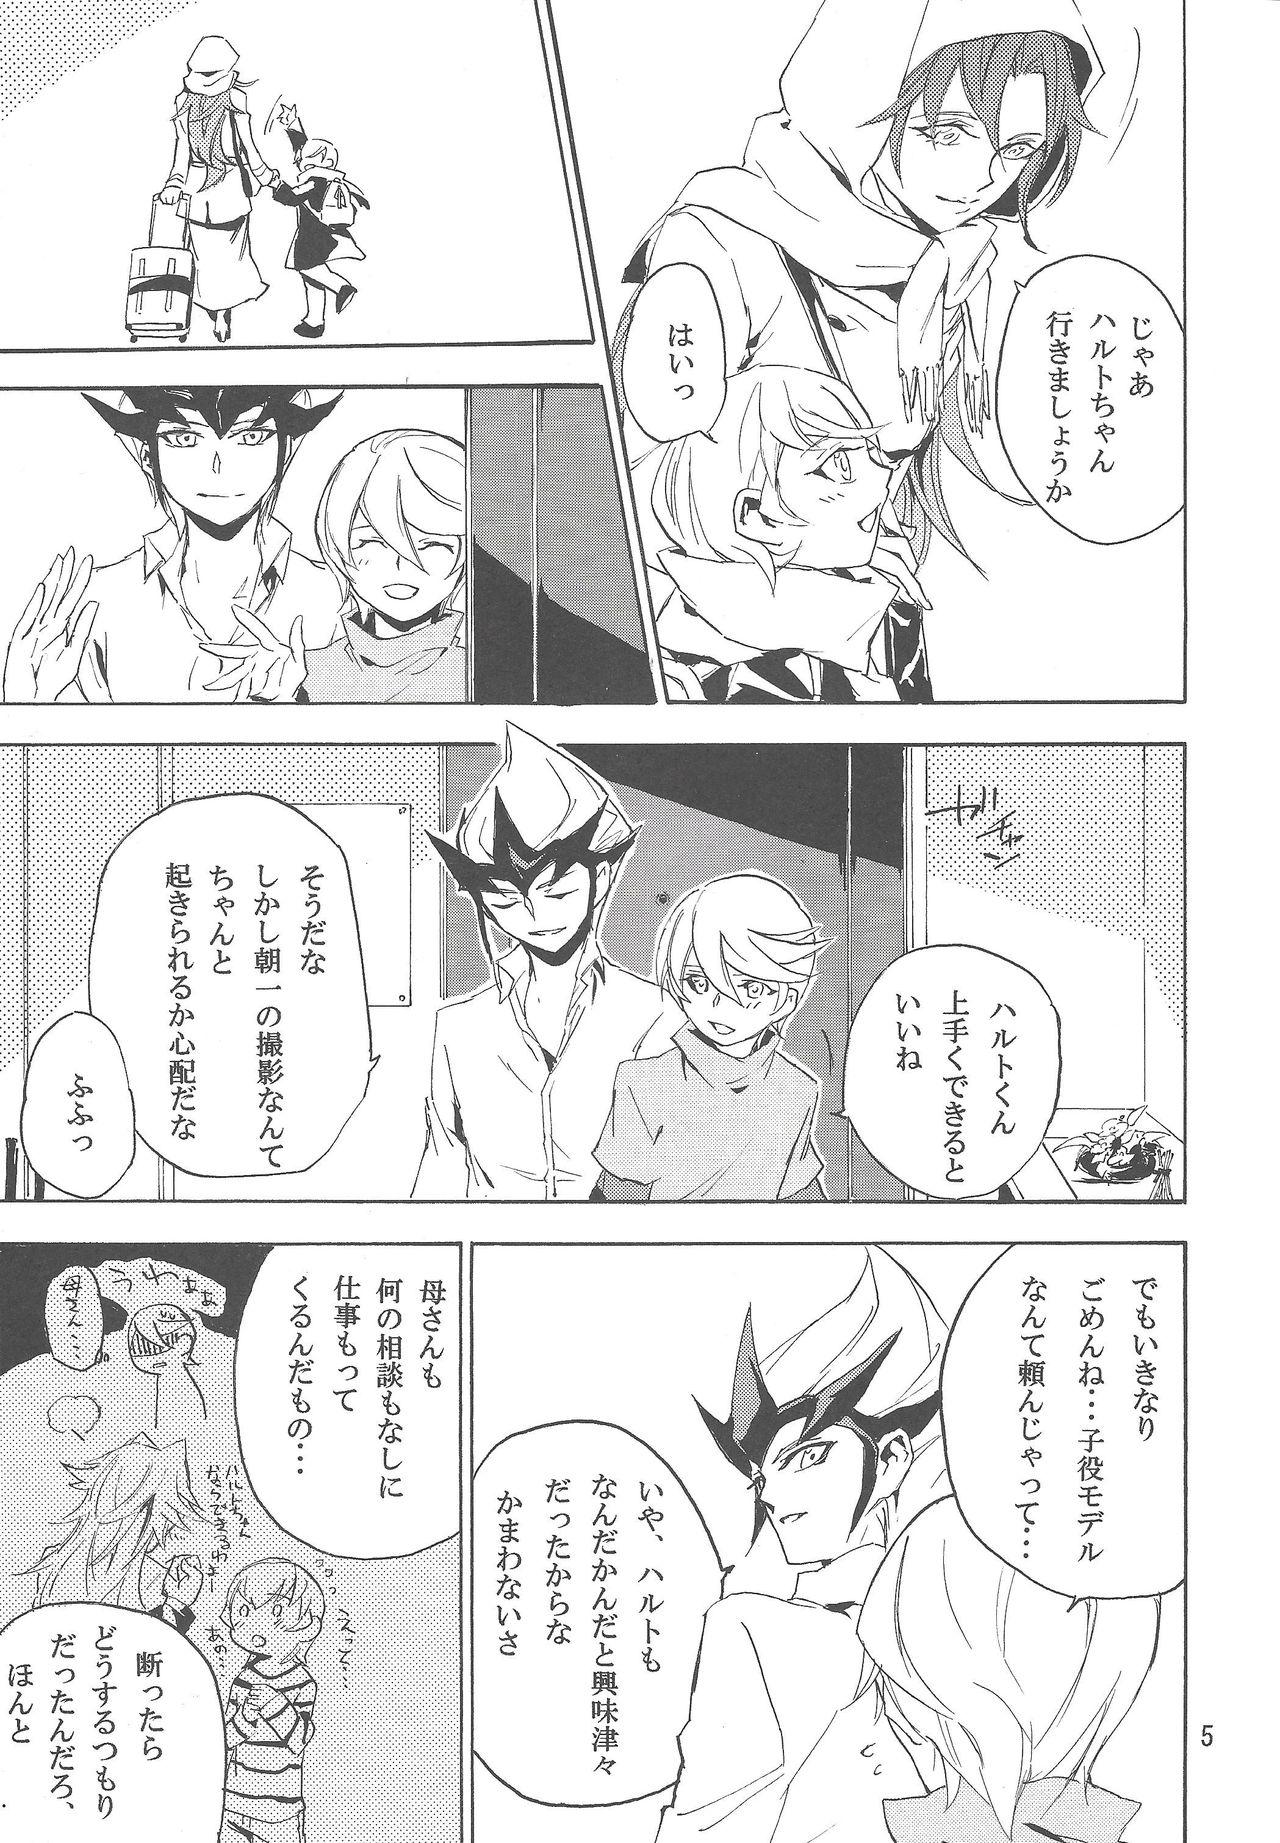 Sixtynine Sugarless Candy - Yu-gi-oh zexal Transsexual - Page 4